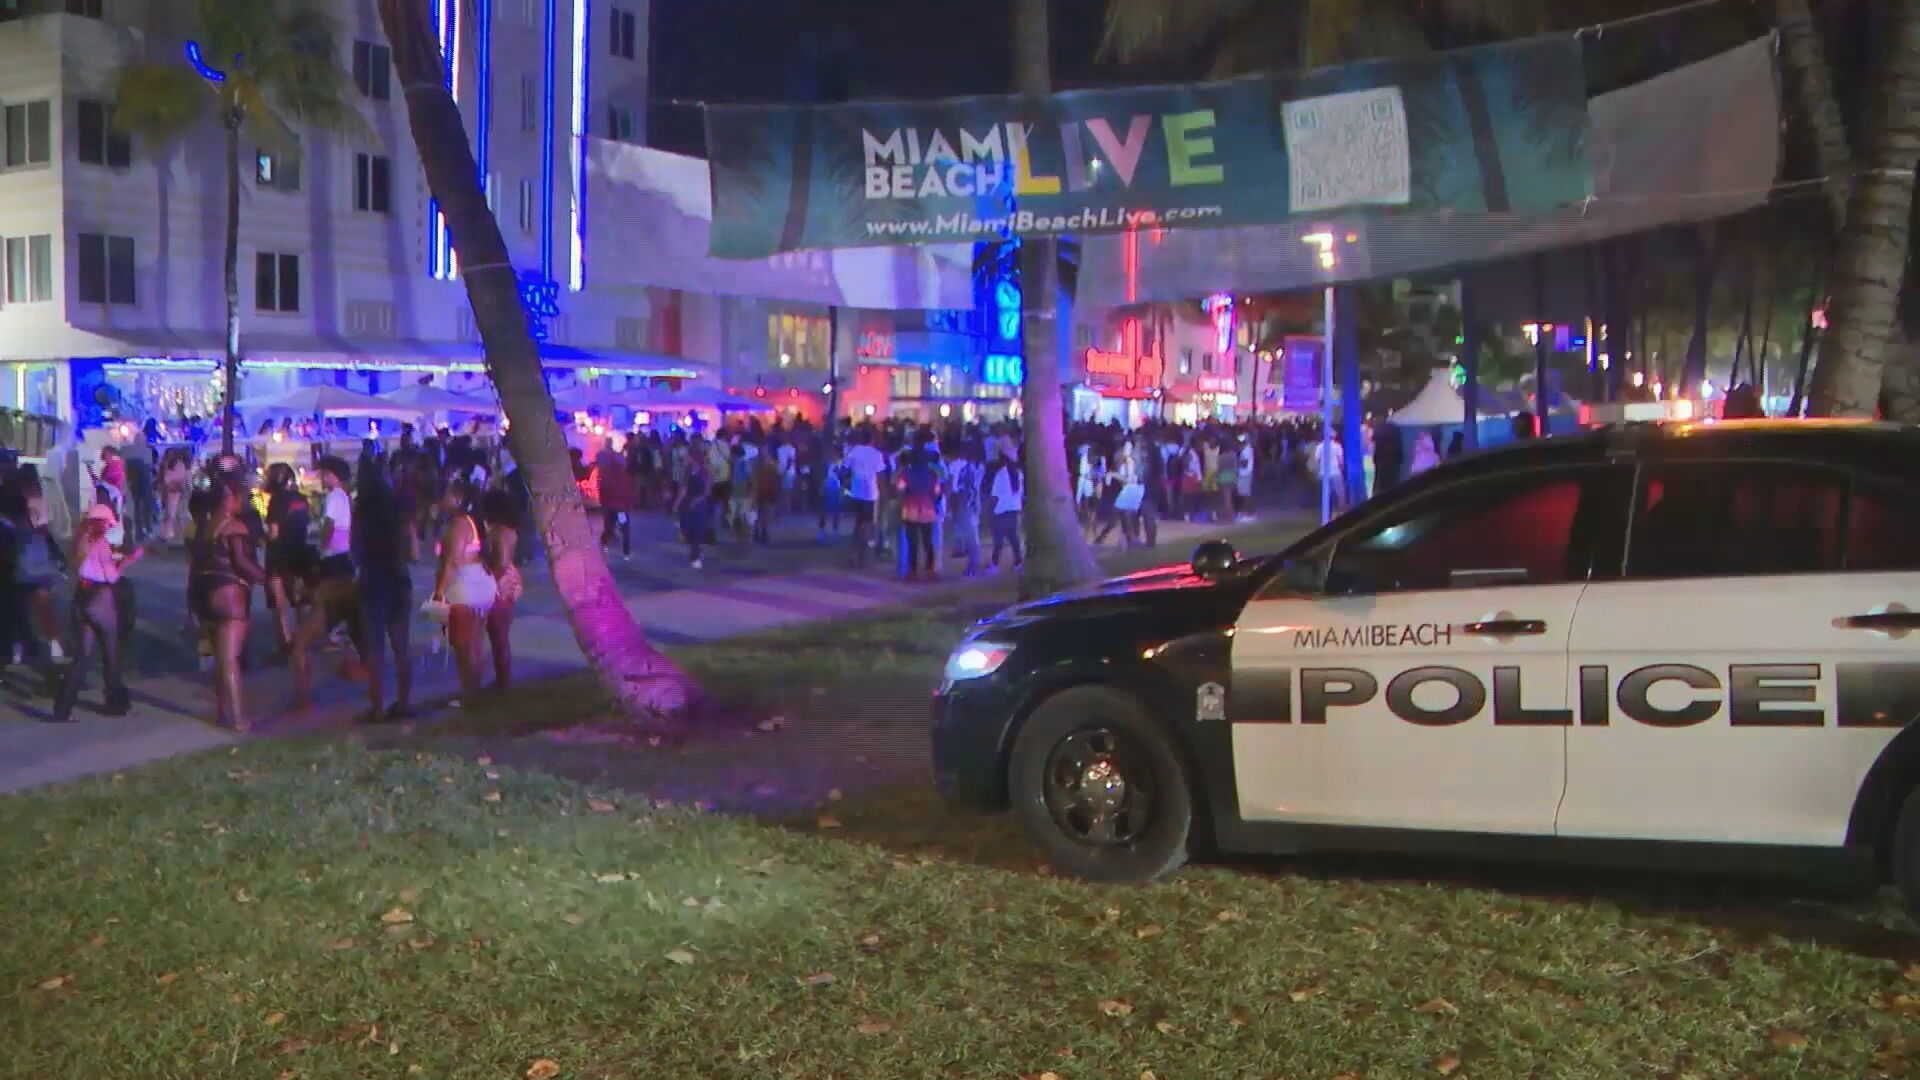 Miami Beach to impose curfew following fatal shootings during Spring Break pic